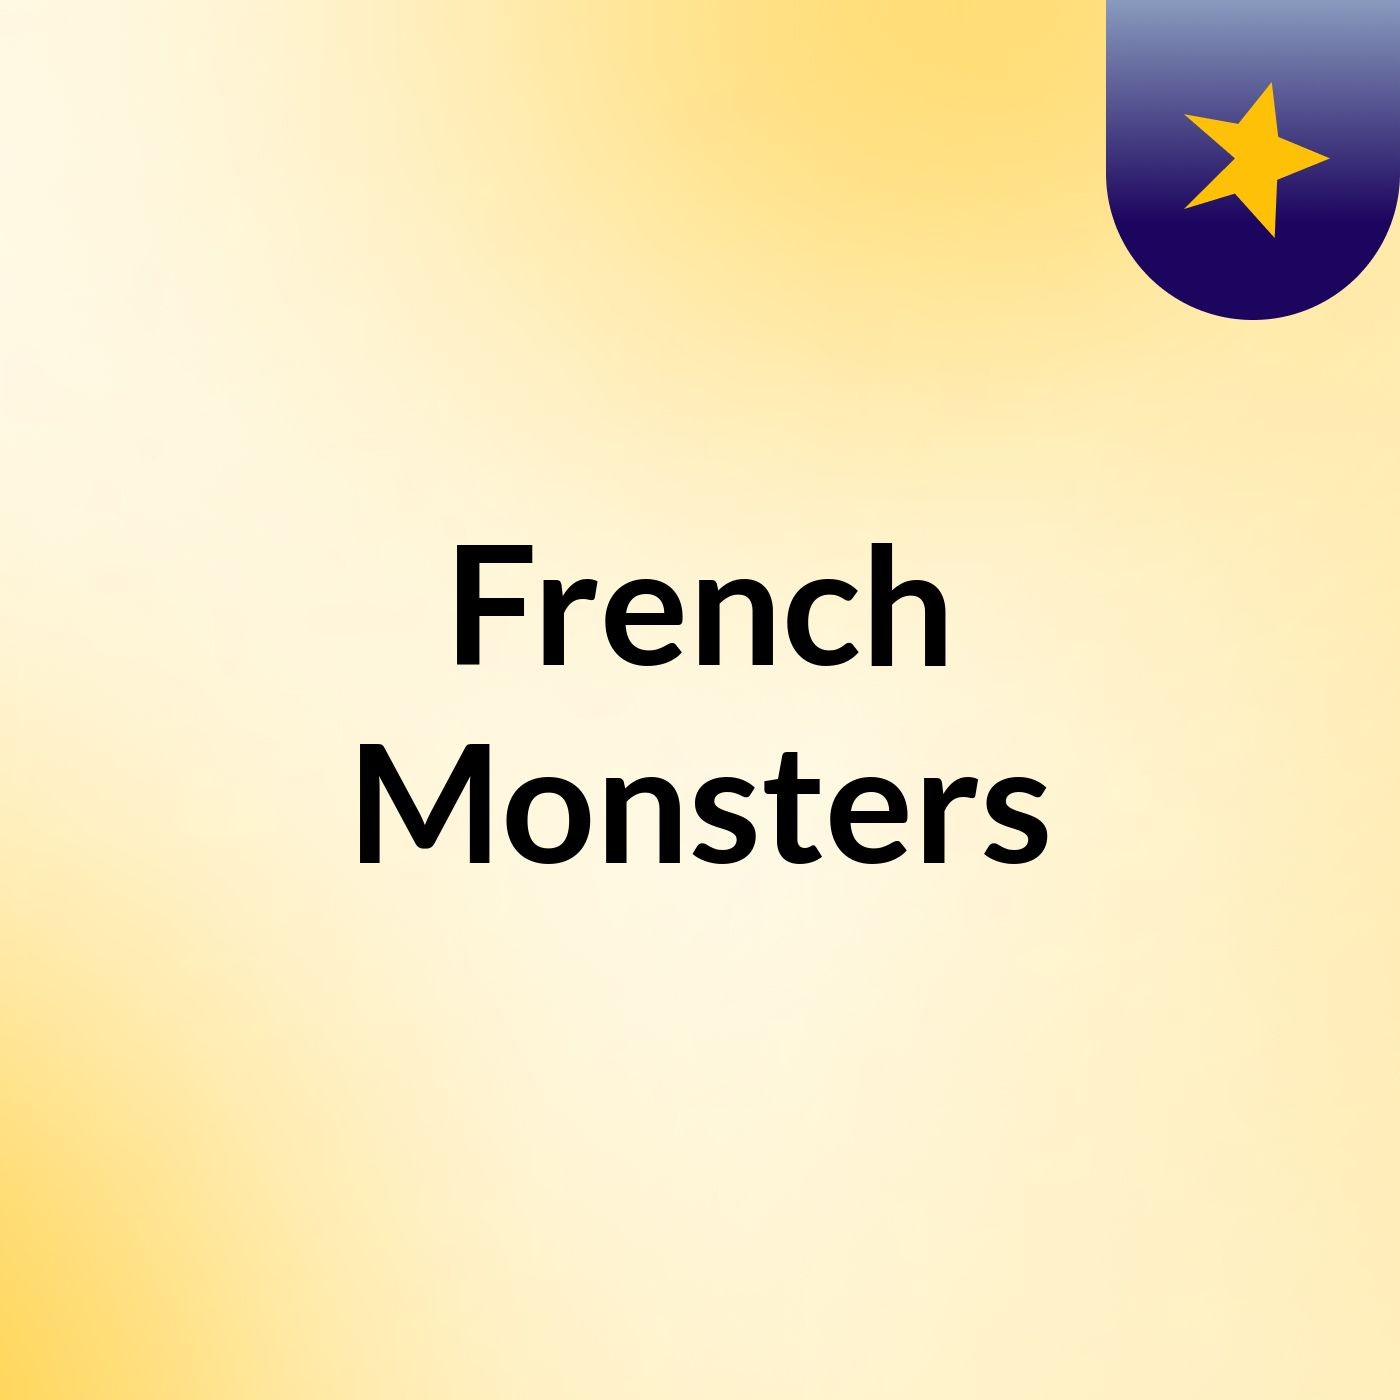 French Monsters